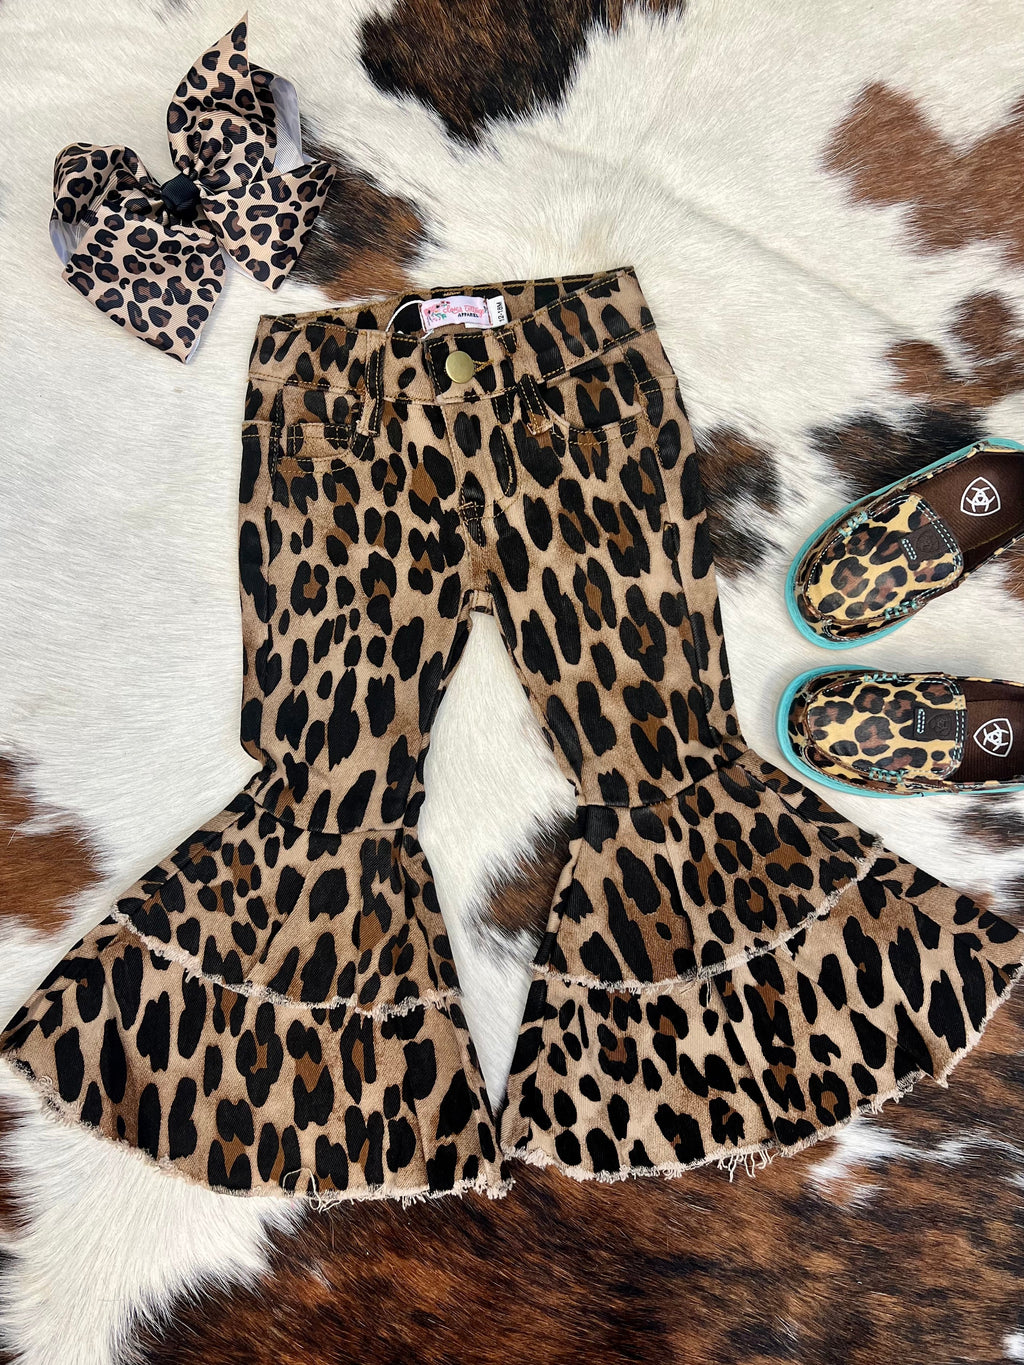 Your The Little Lainey's Leopard Bells will be rocking the trendiest jeans around with these cool bell bottoms! With a leopard print and western-style silhouette, these leopard fab bell bottoms will have them looking hip and stylish. The double tiered hem gives a unique touch, ensuring their look stands out from the crowd. Time to up their fashion game!